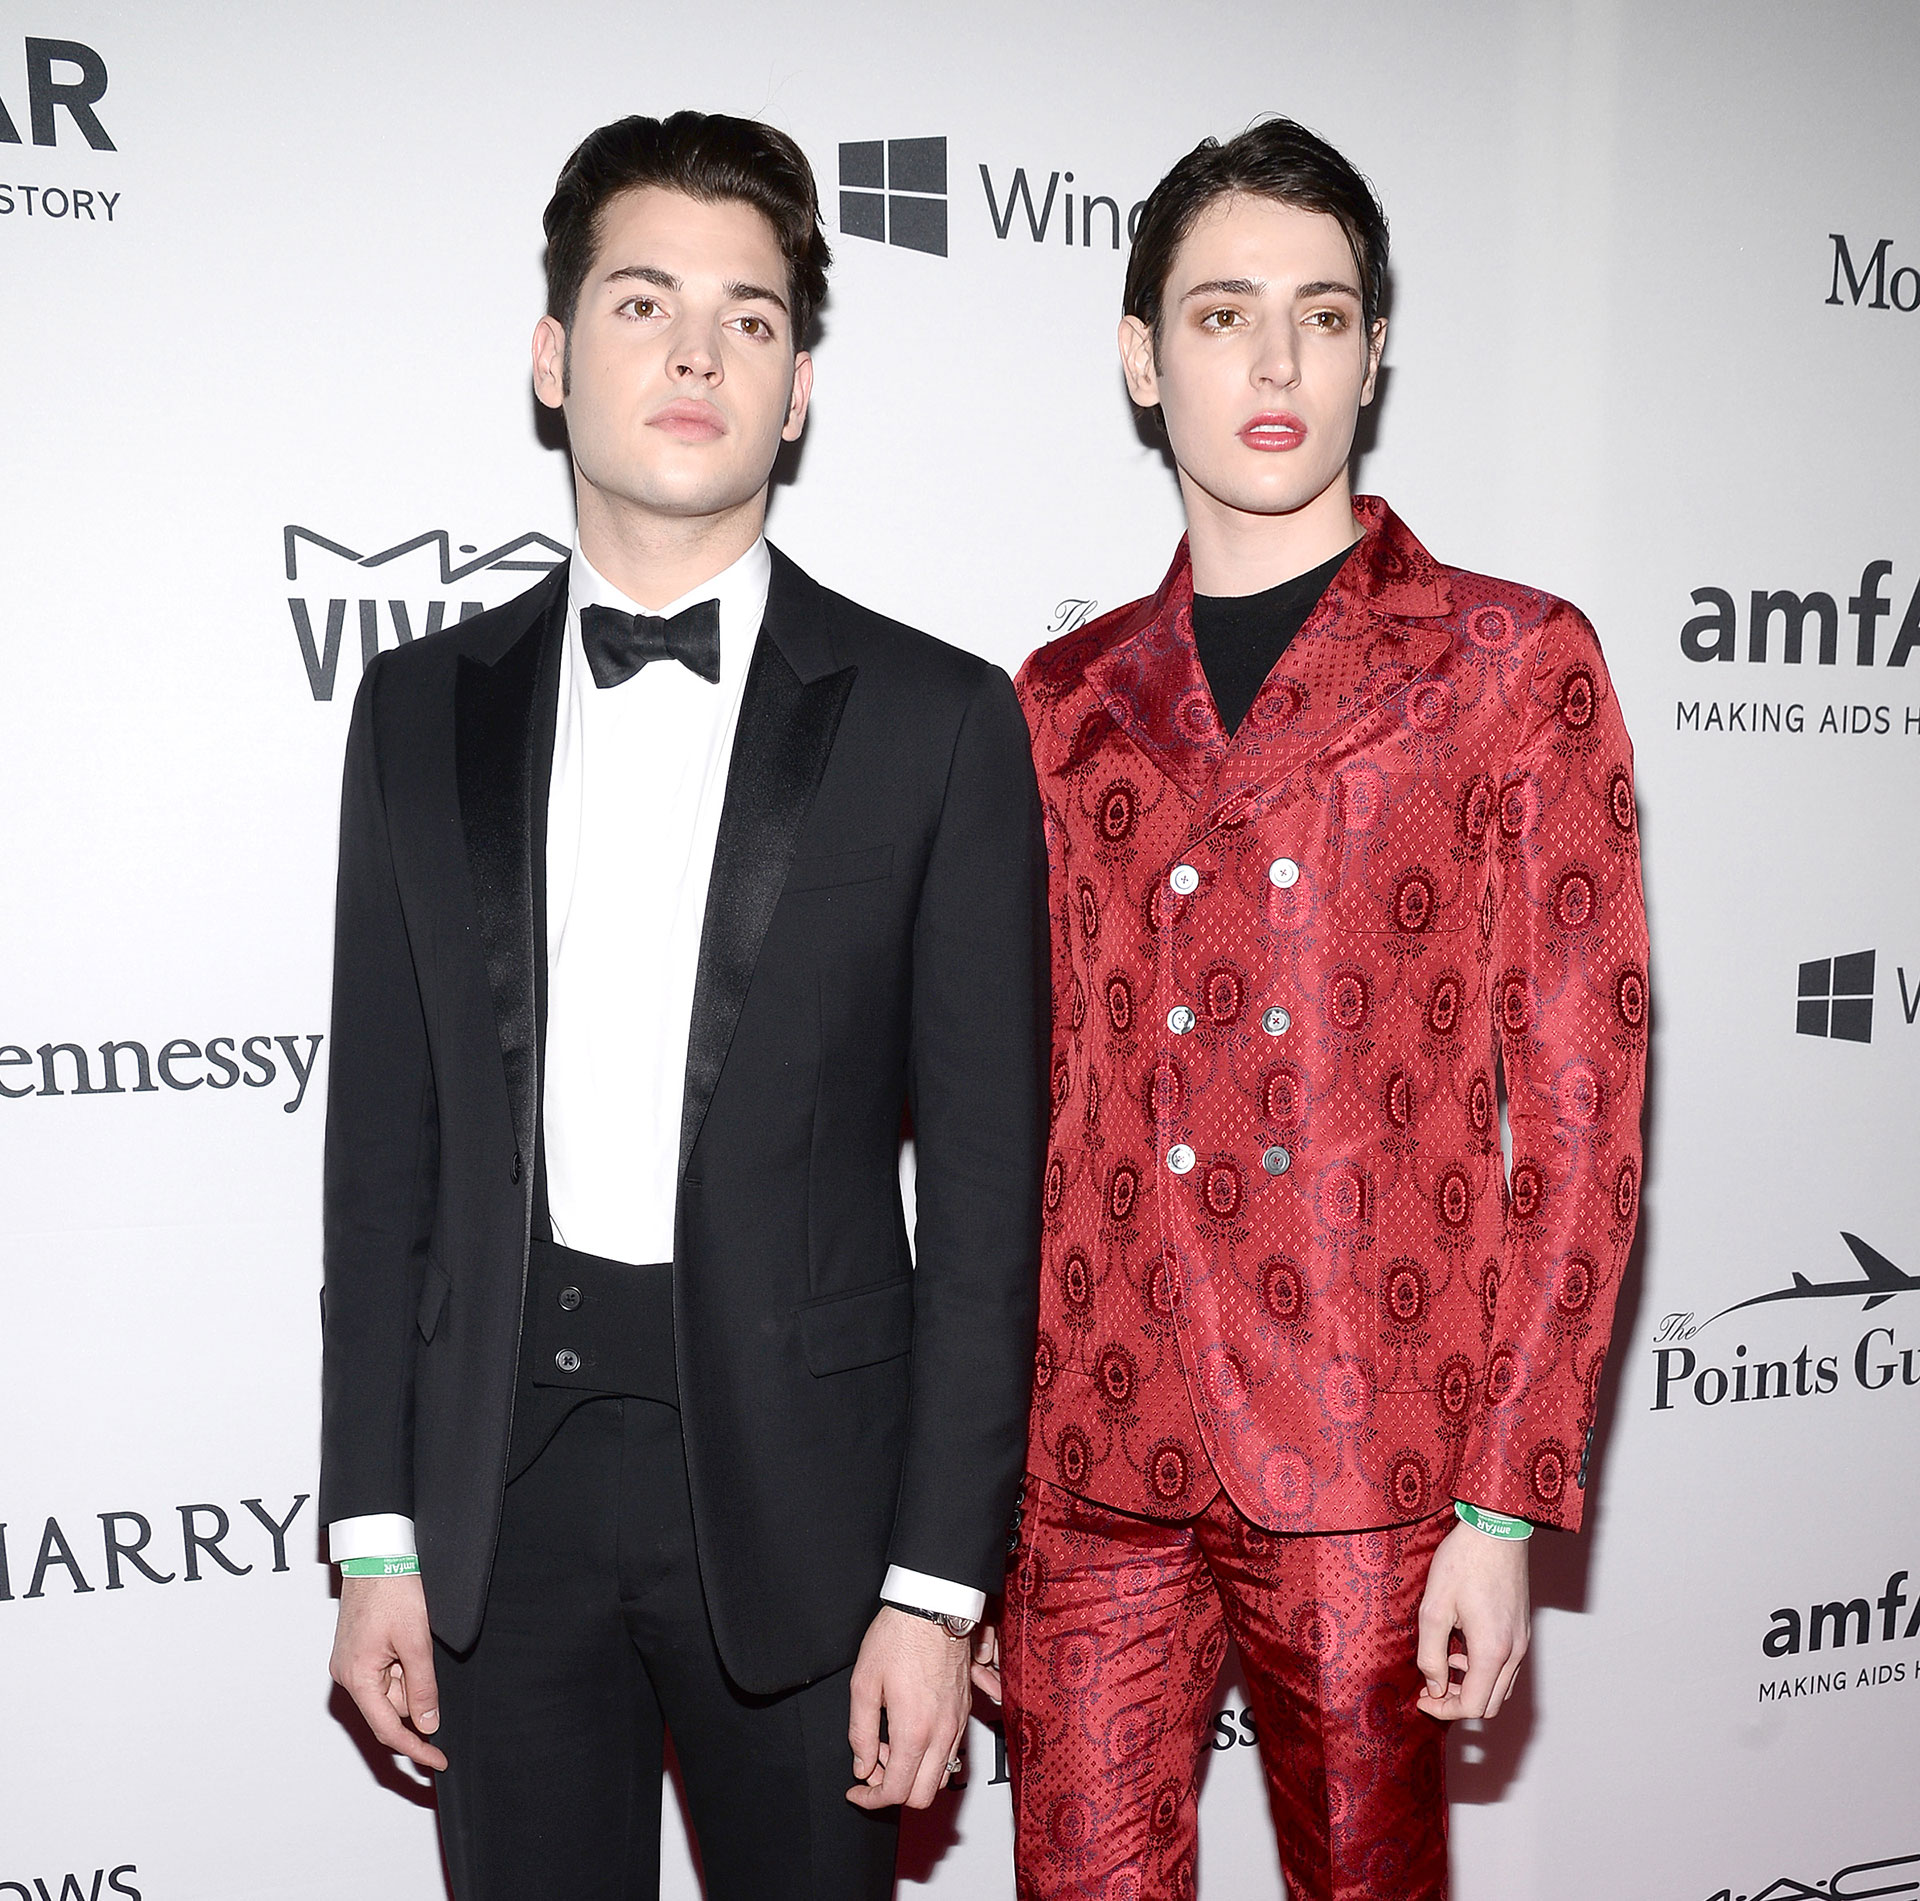 Peter y Harry Brant (The Grosby Group)